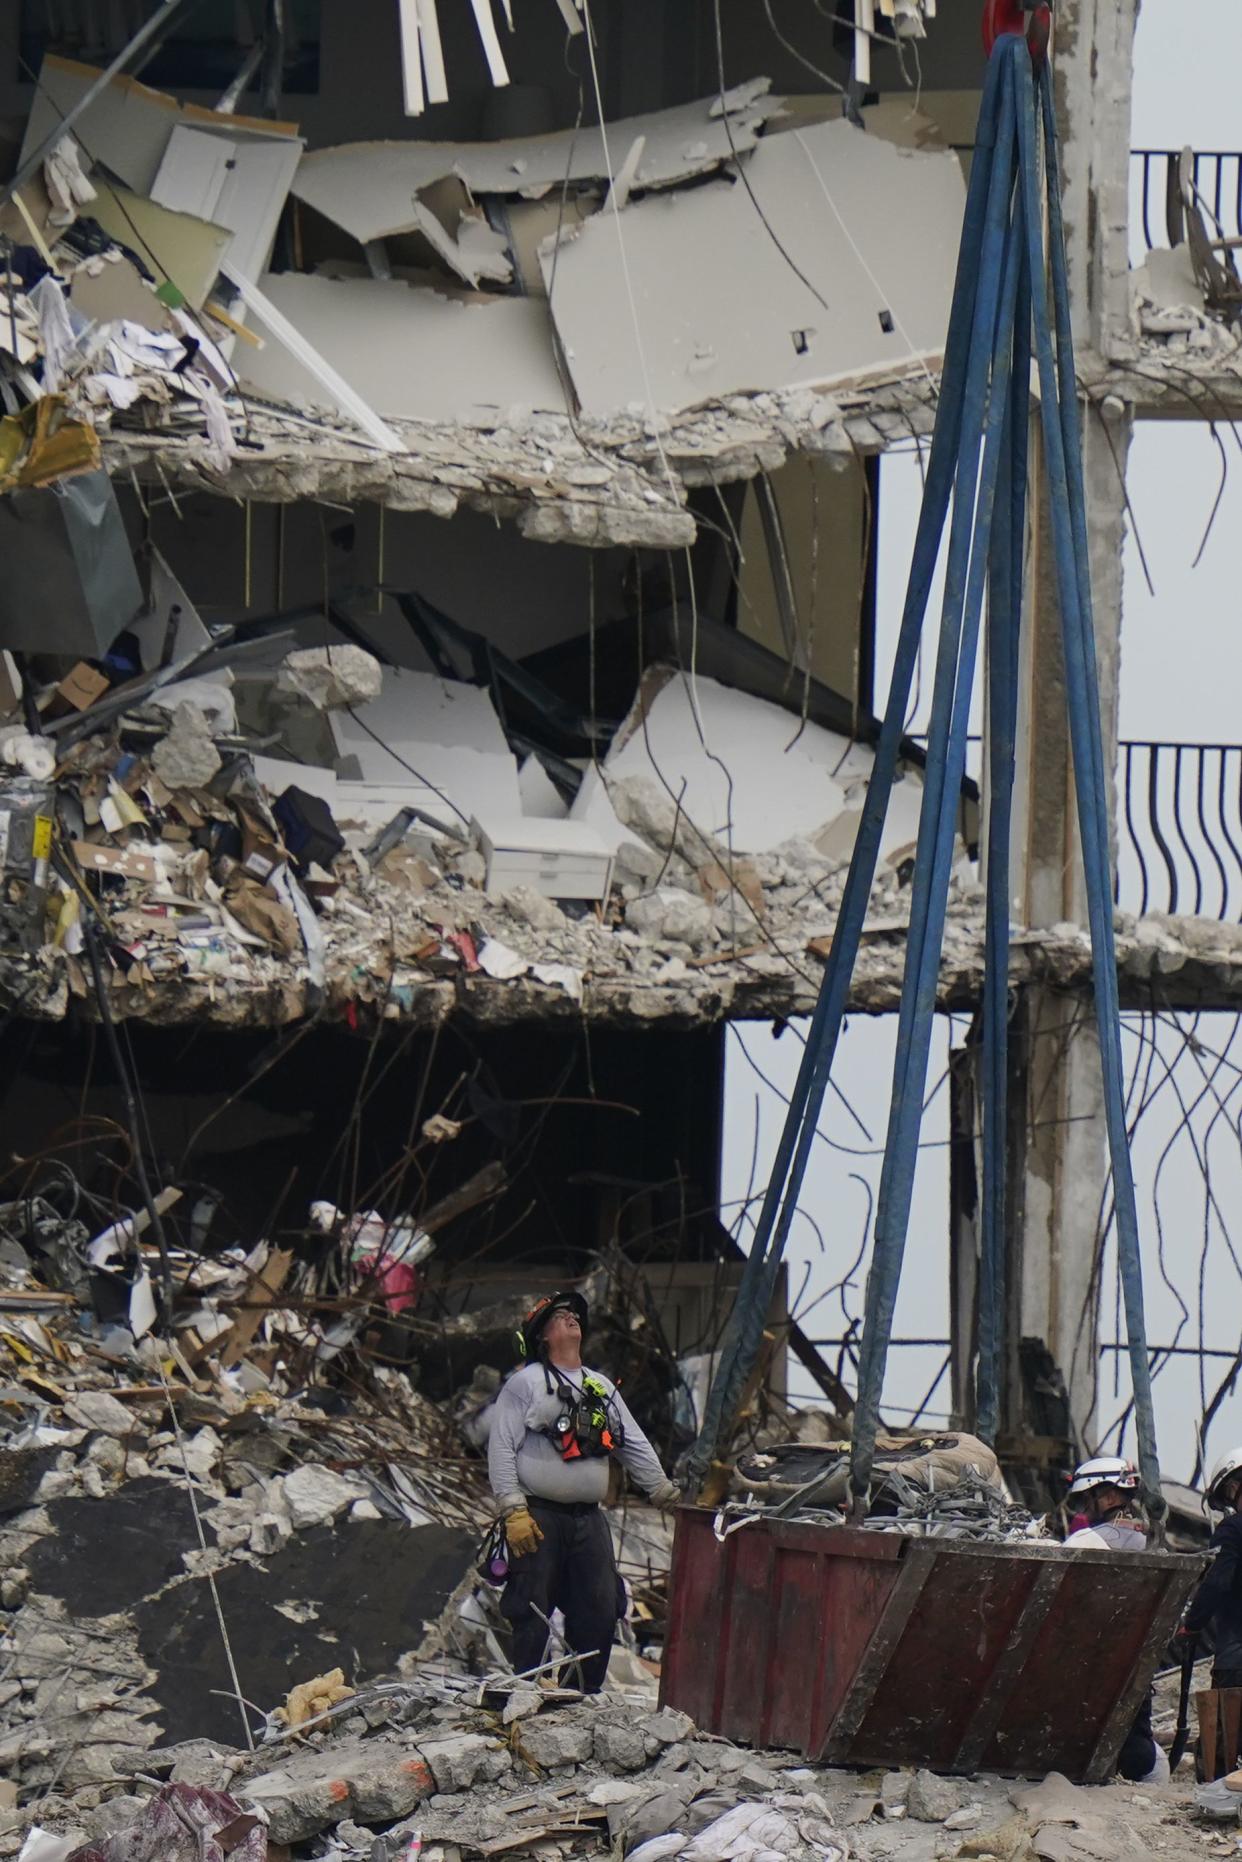 A crane prepares to remove a load of debris and household items as search and rescue personnel work atop the rubble at the Champlain Towers South condo building, where scores of people remain missing almost a week after it partially collapsed, on Wednesday, June 30, 2021, in Surfside, Fla.